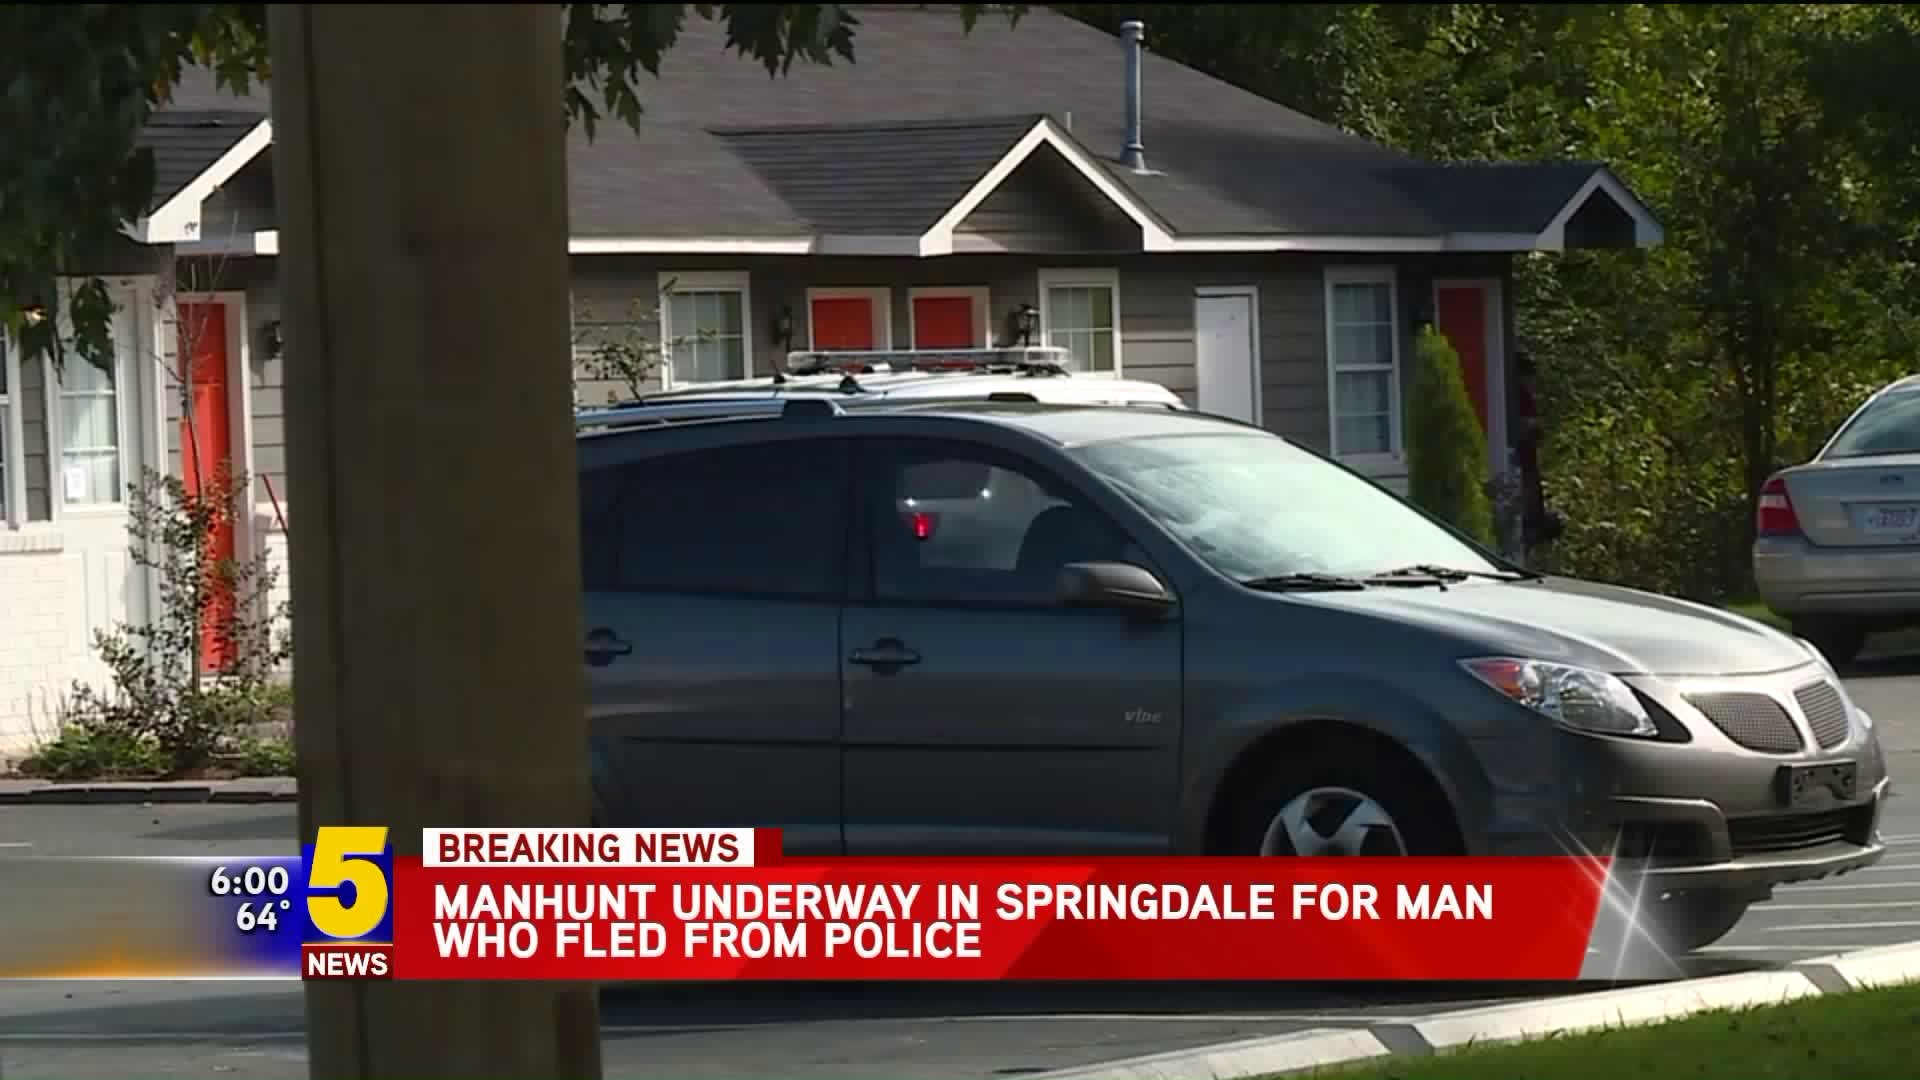 Manhunt Underway In Springdale For Man Who Fled From Police